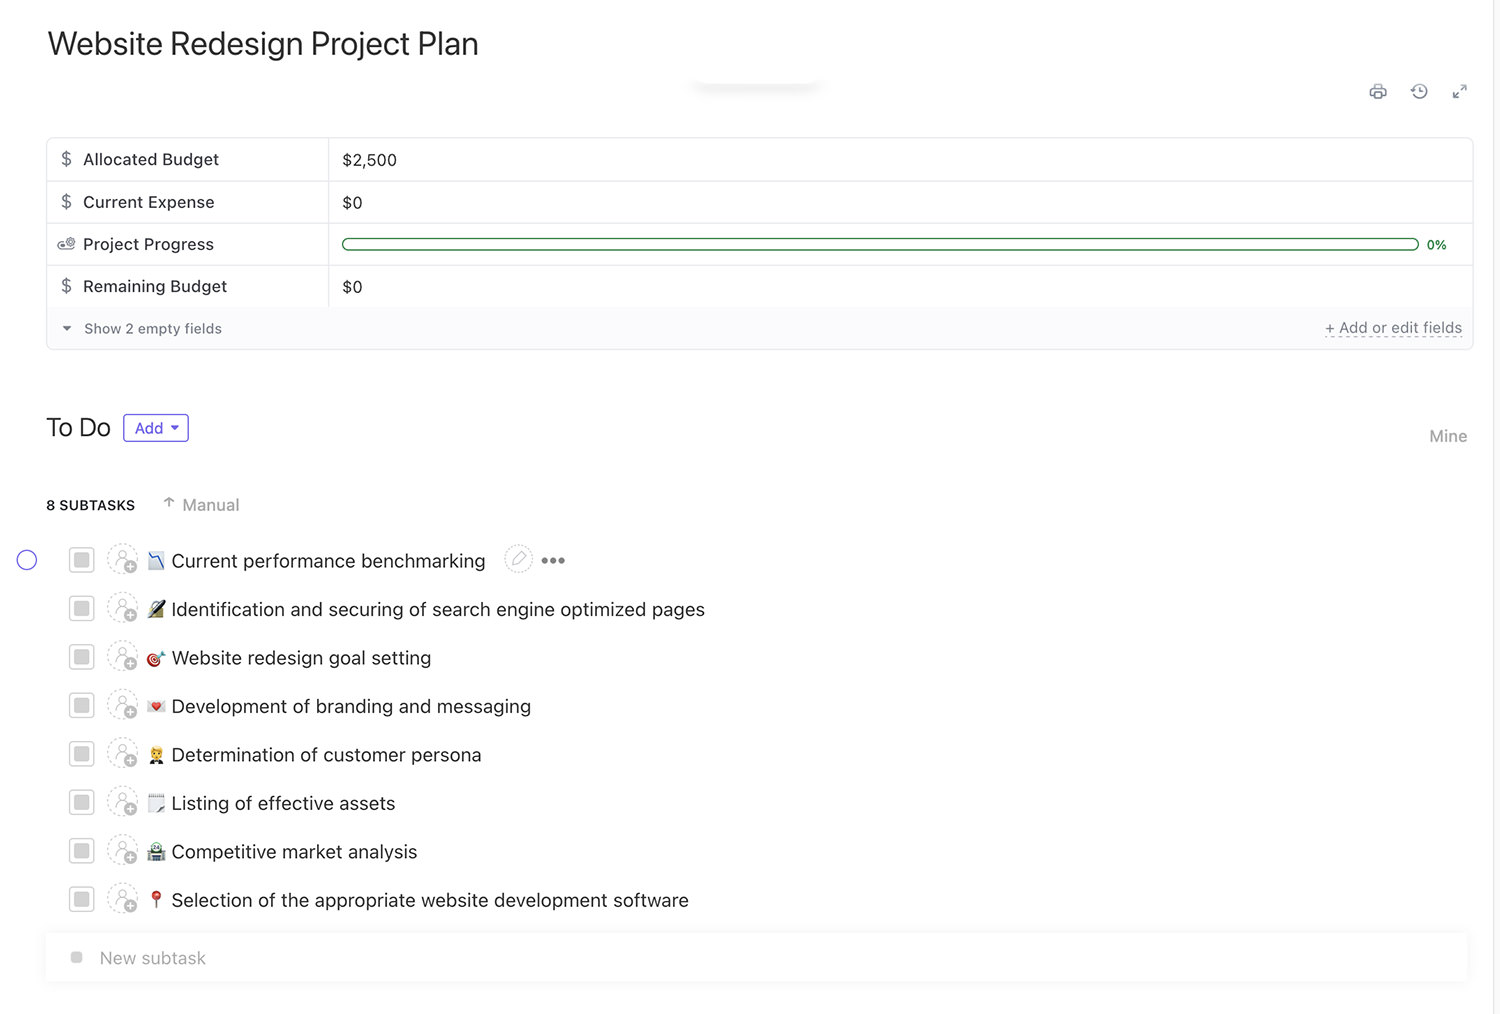 ClickUp Website Redesign Project Plan template